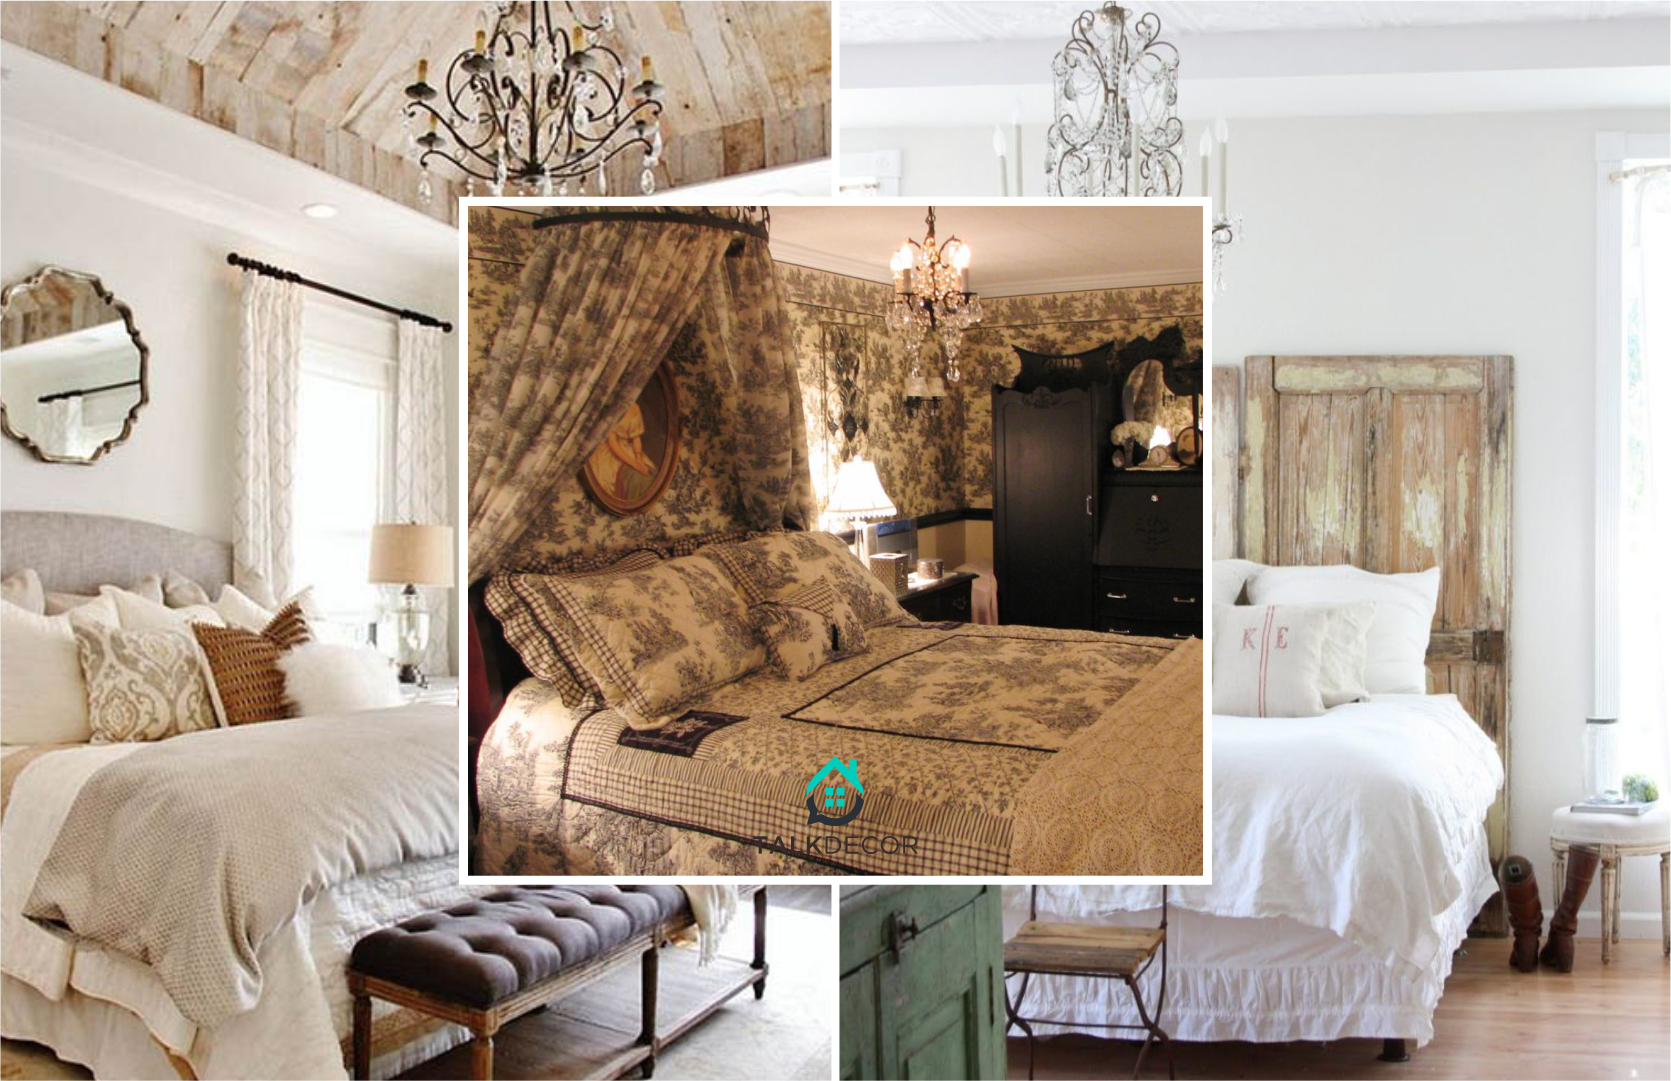 20 Beautiful French Country Decor Ideas that Adds Romantic Feeling to Your Bedroom